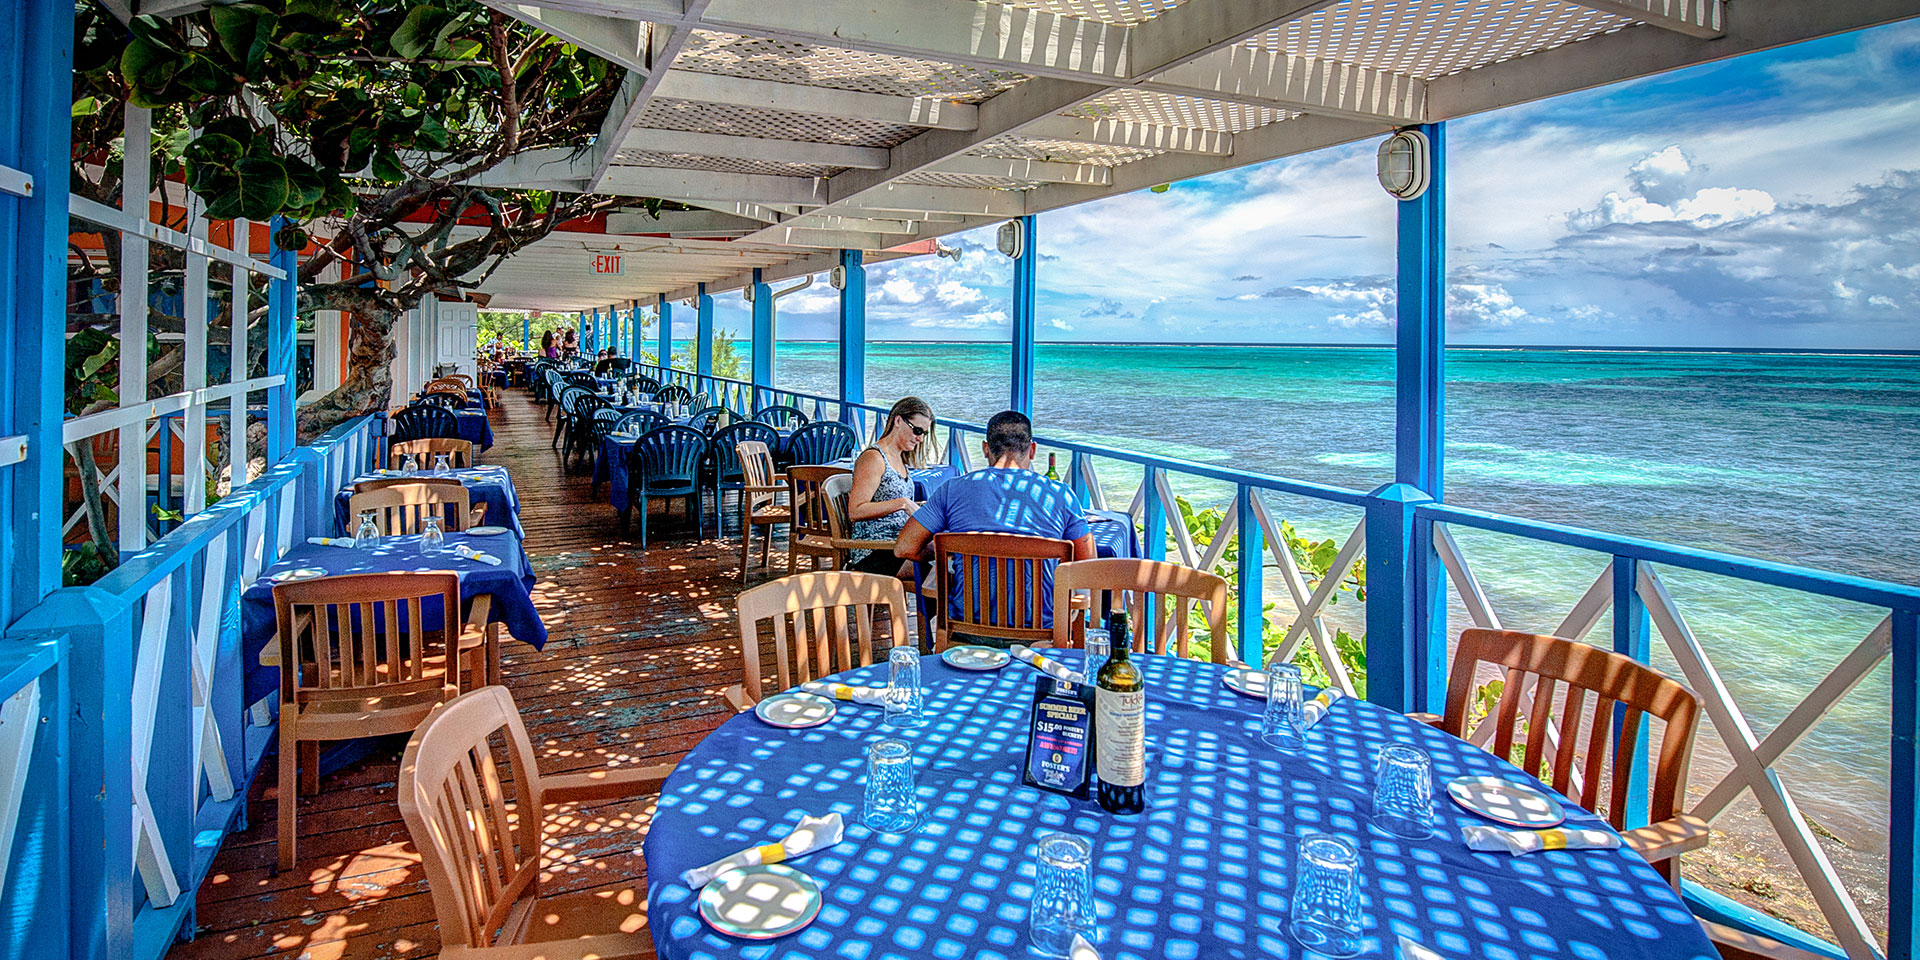 Where to Find the Best Global Eats on Grand Cayman